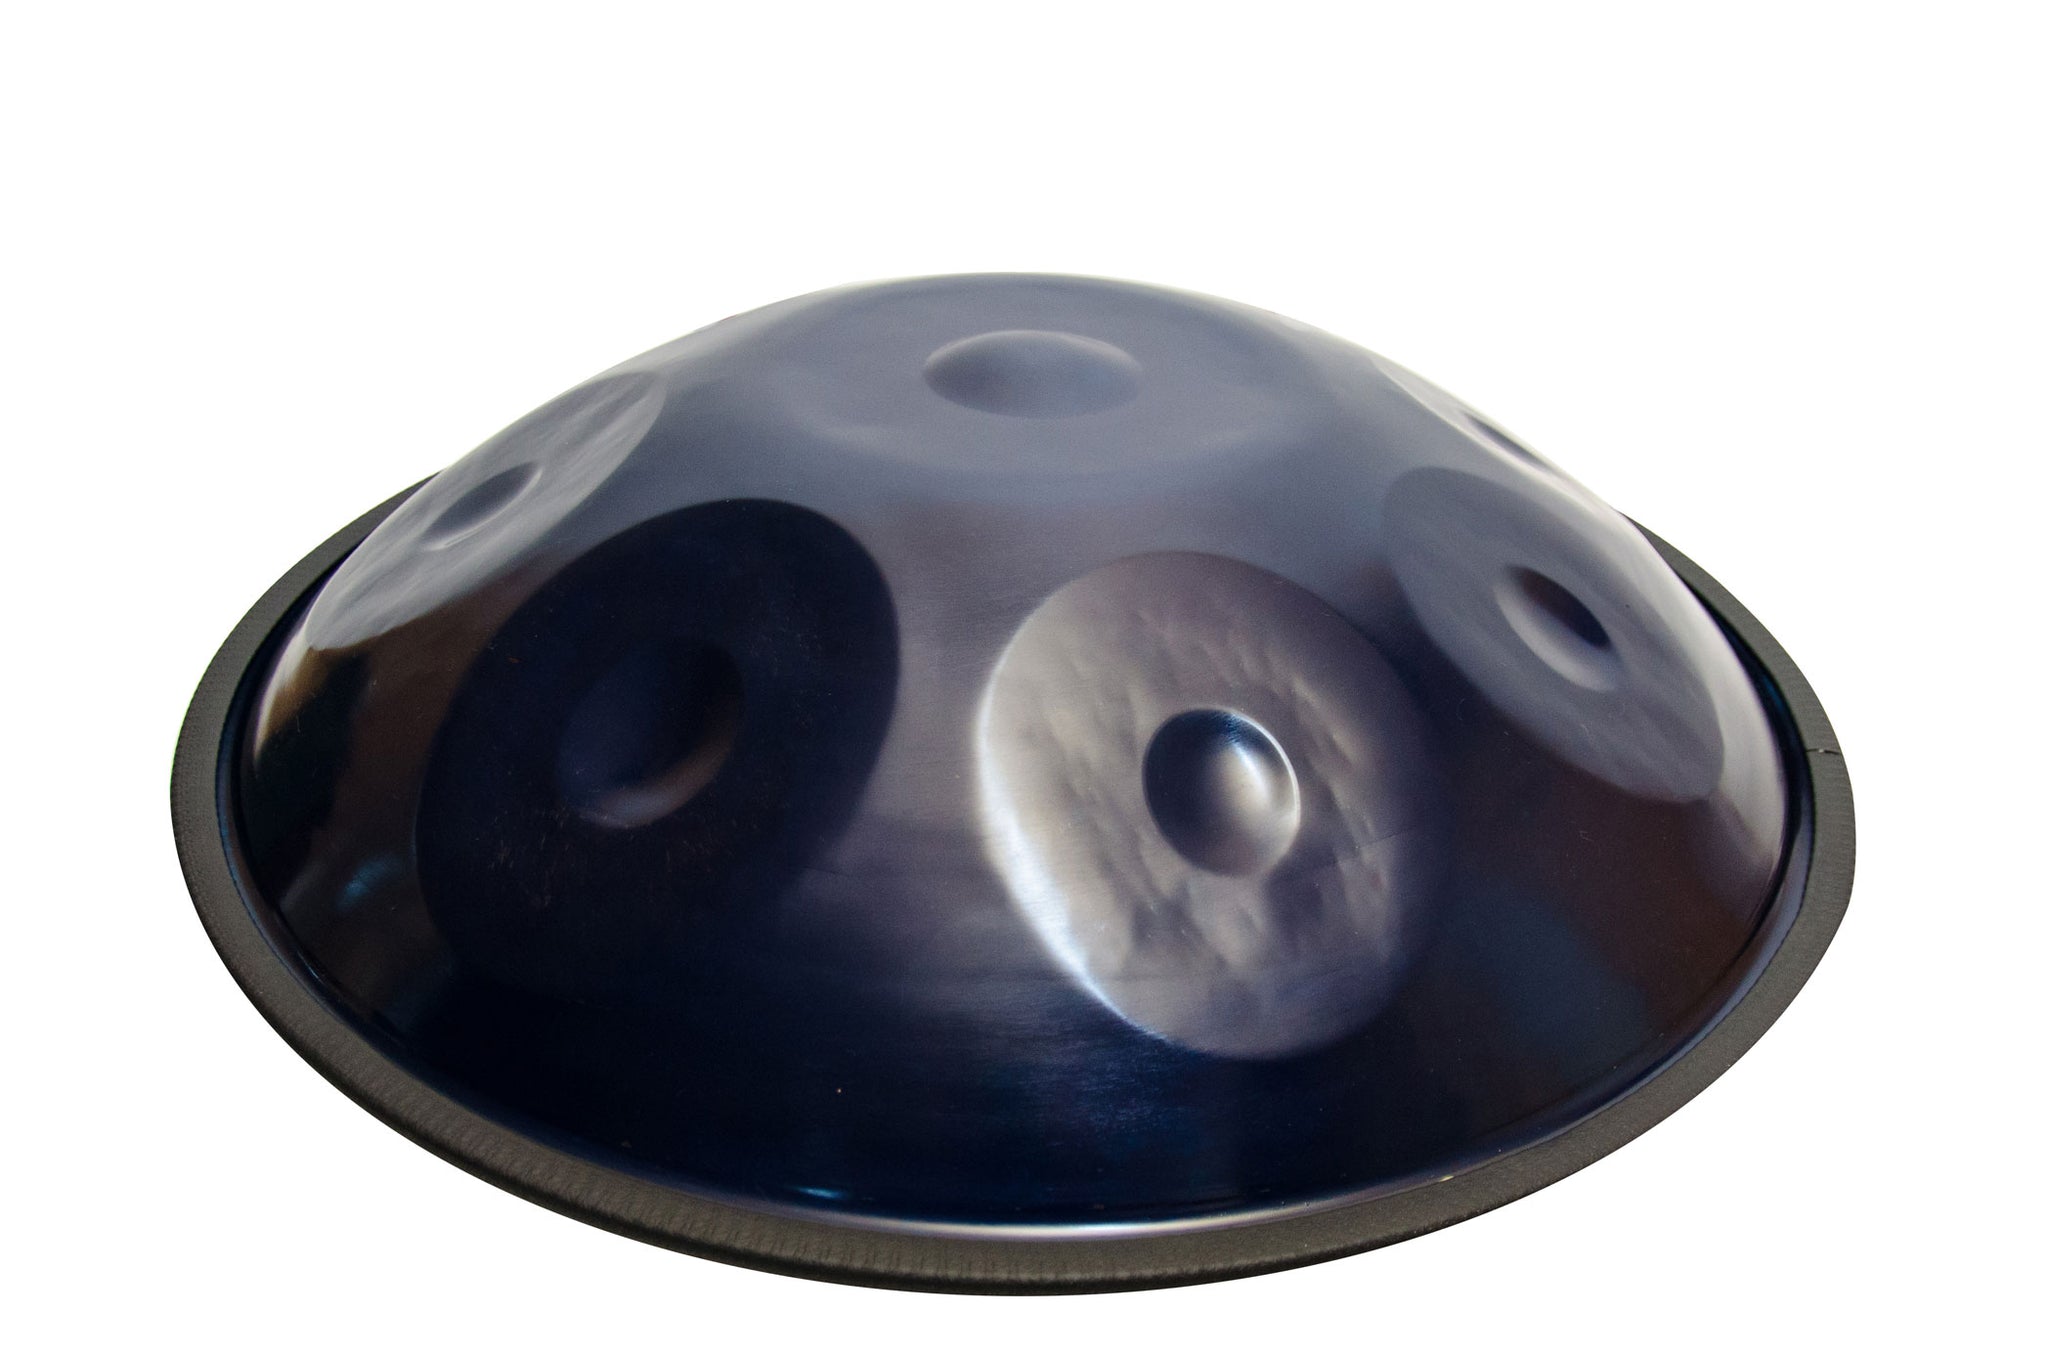 How do I take care of my handpan? (Resources & tips)